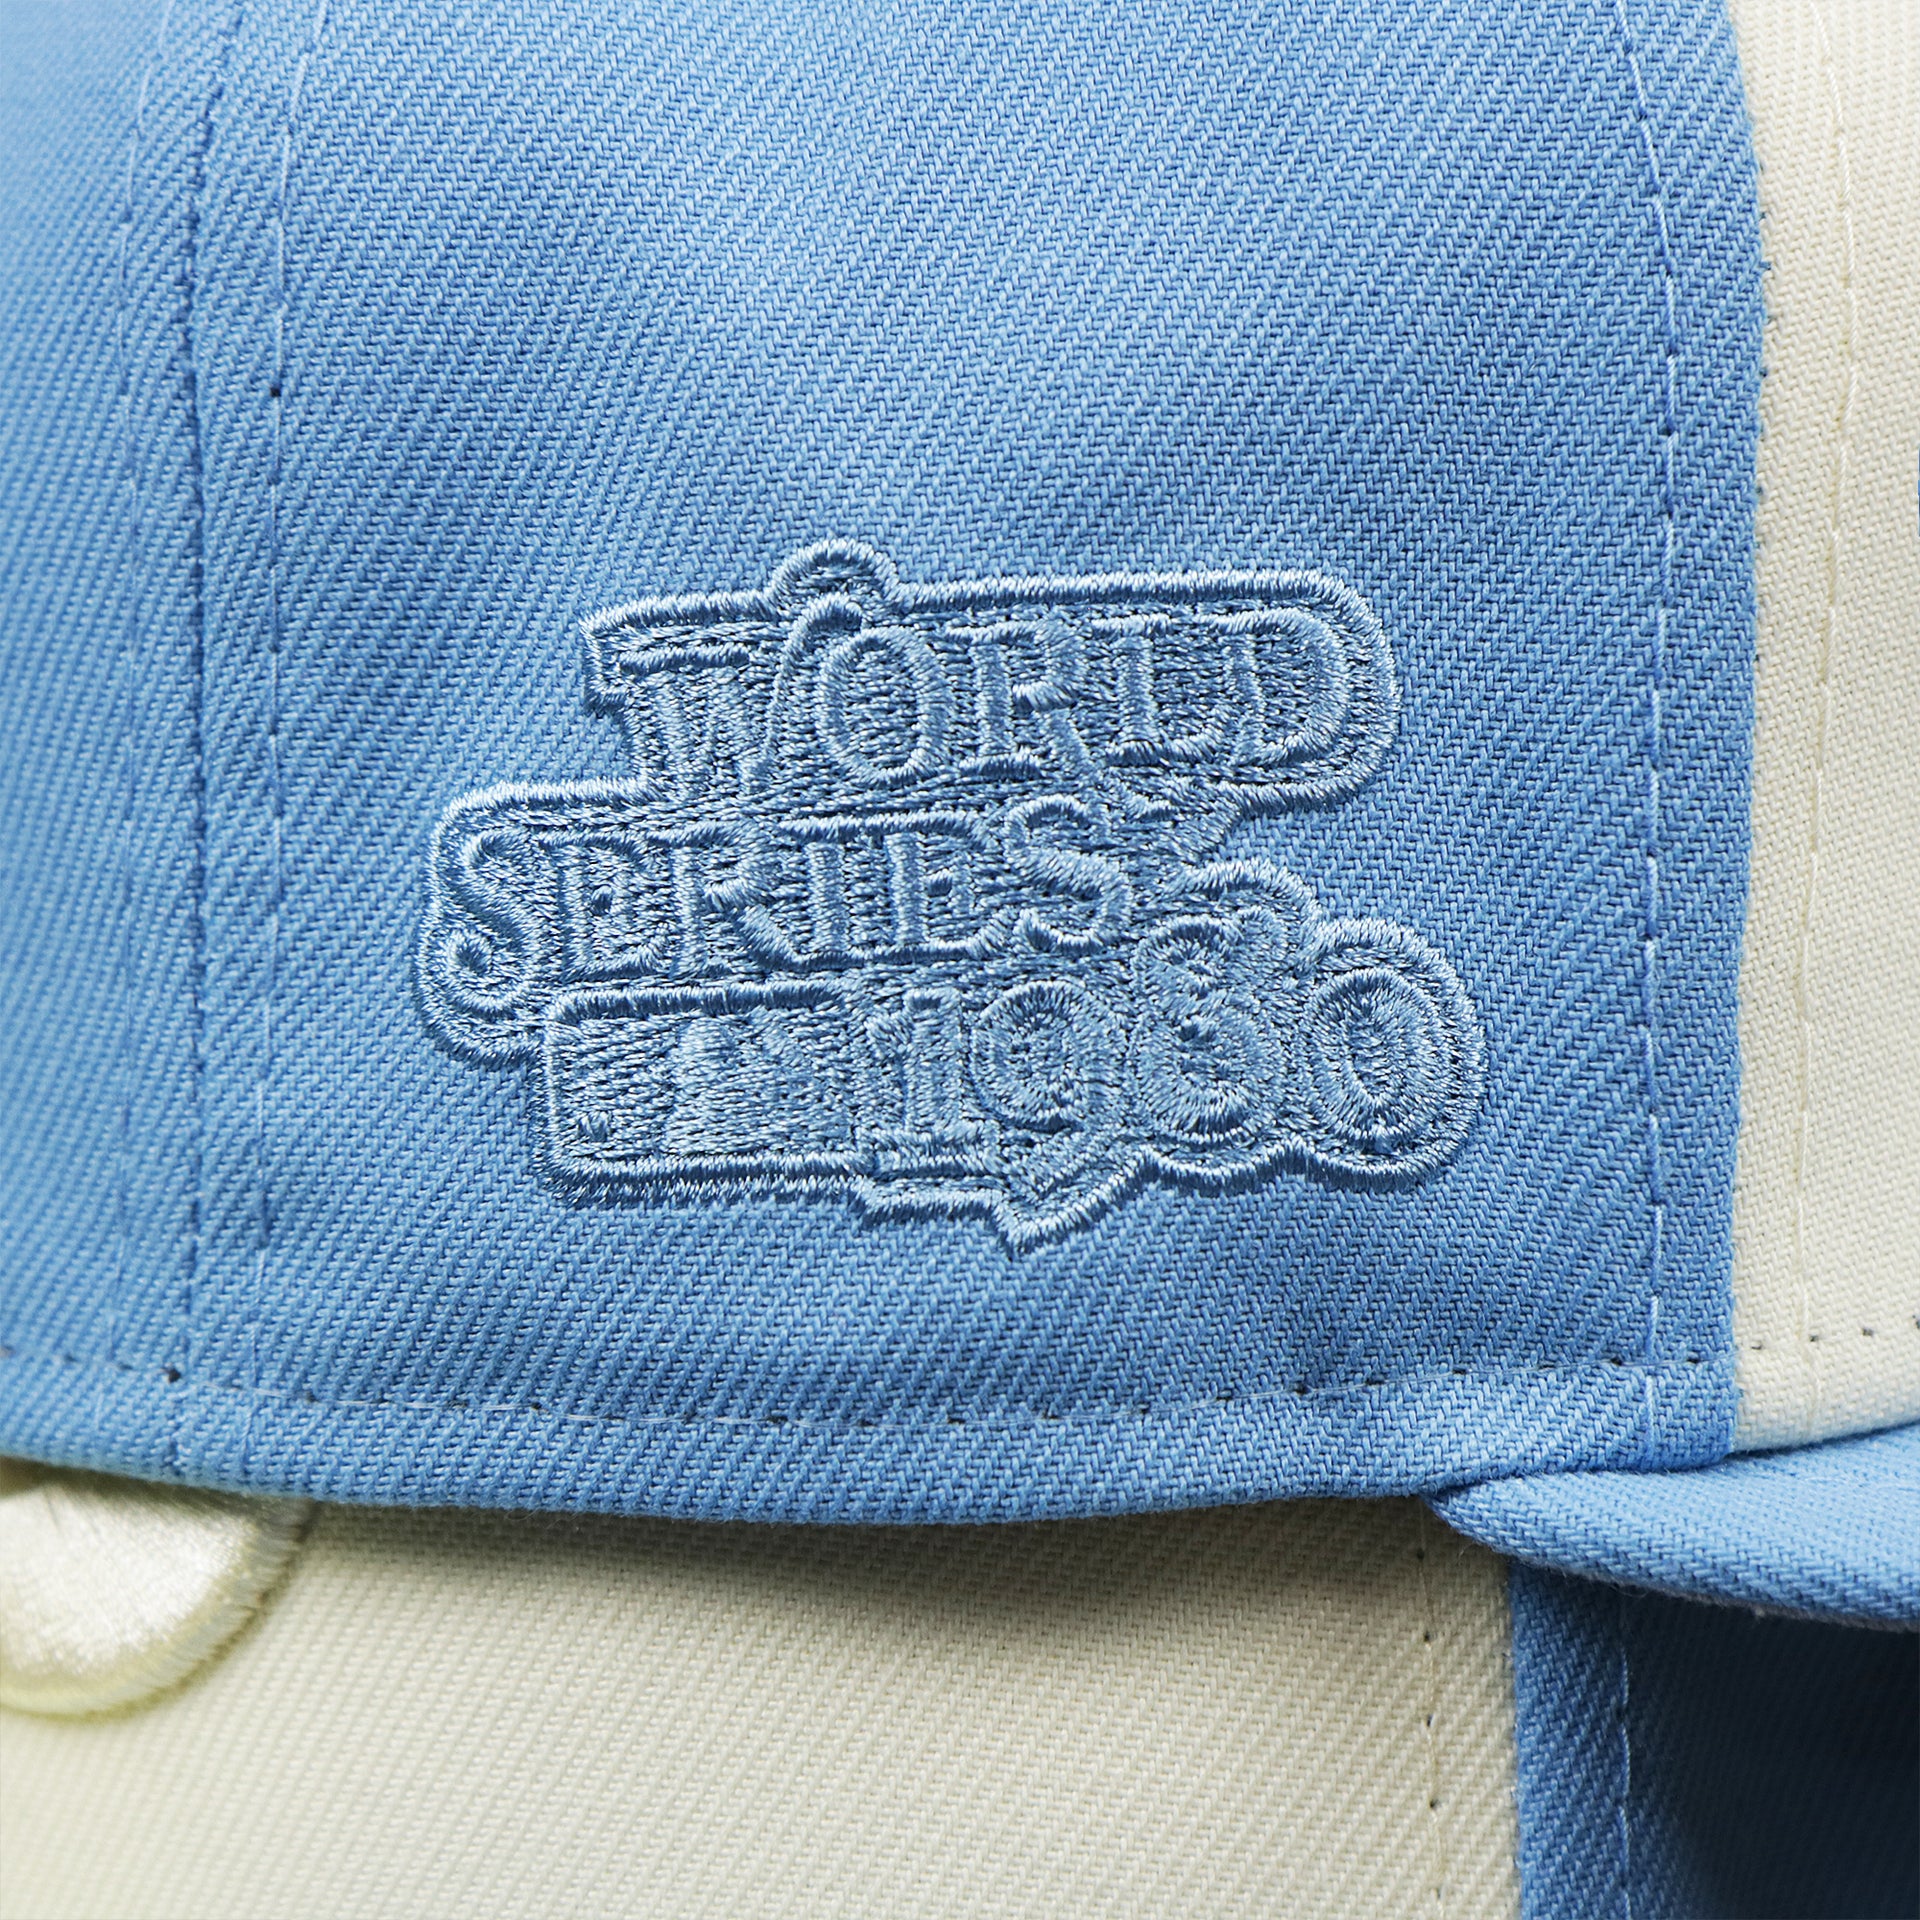 The World Series Side Patch on the Cooperstown Philadelphia Phillies Two Tone Tonal World Series Side Patch Fitted Cap With Gray Bottom | Columbia Blue and White Fitted Cap